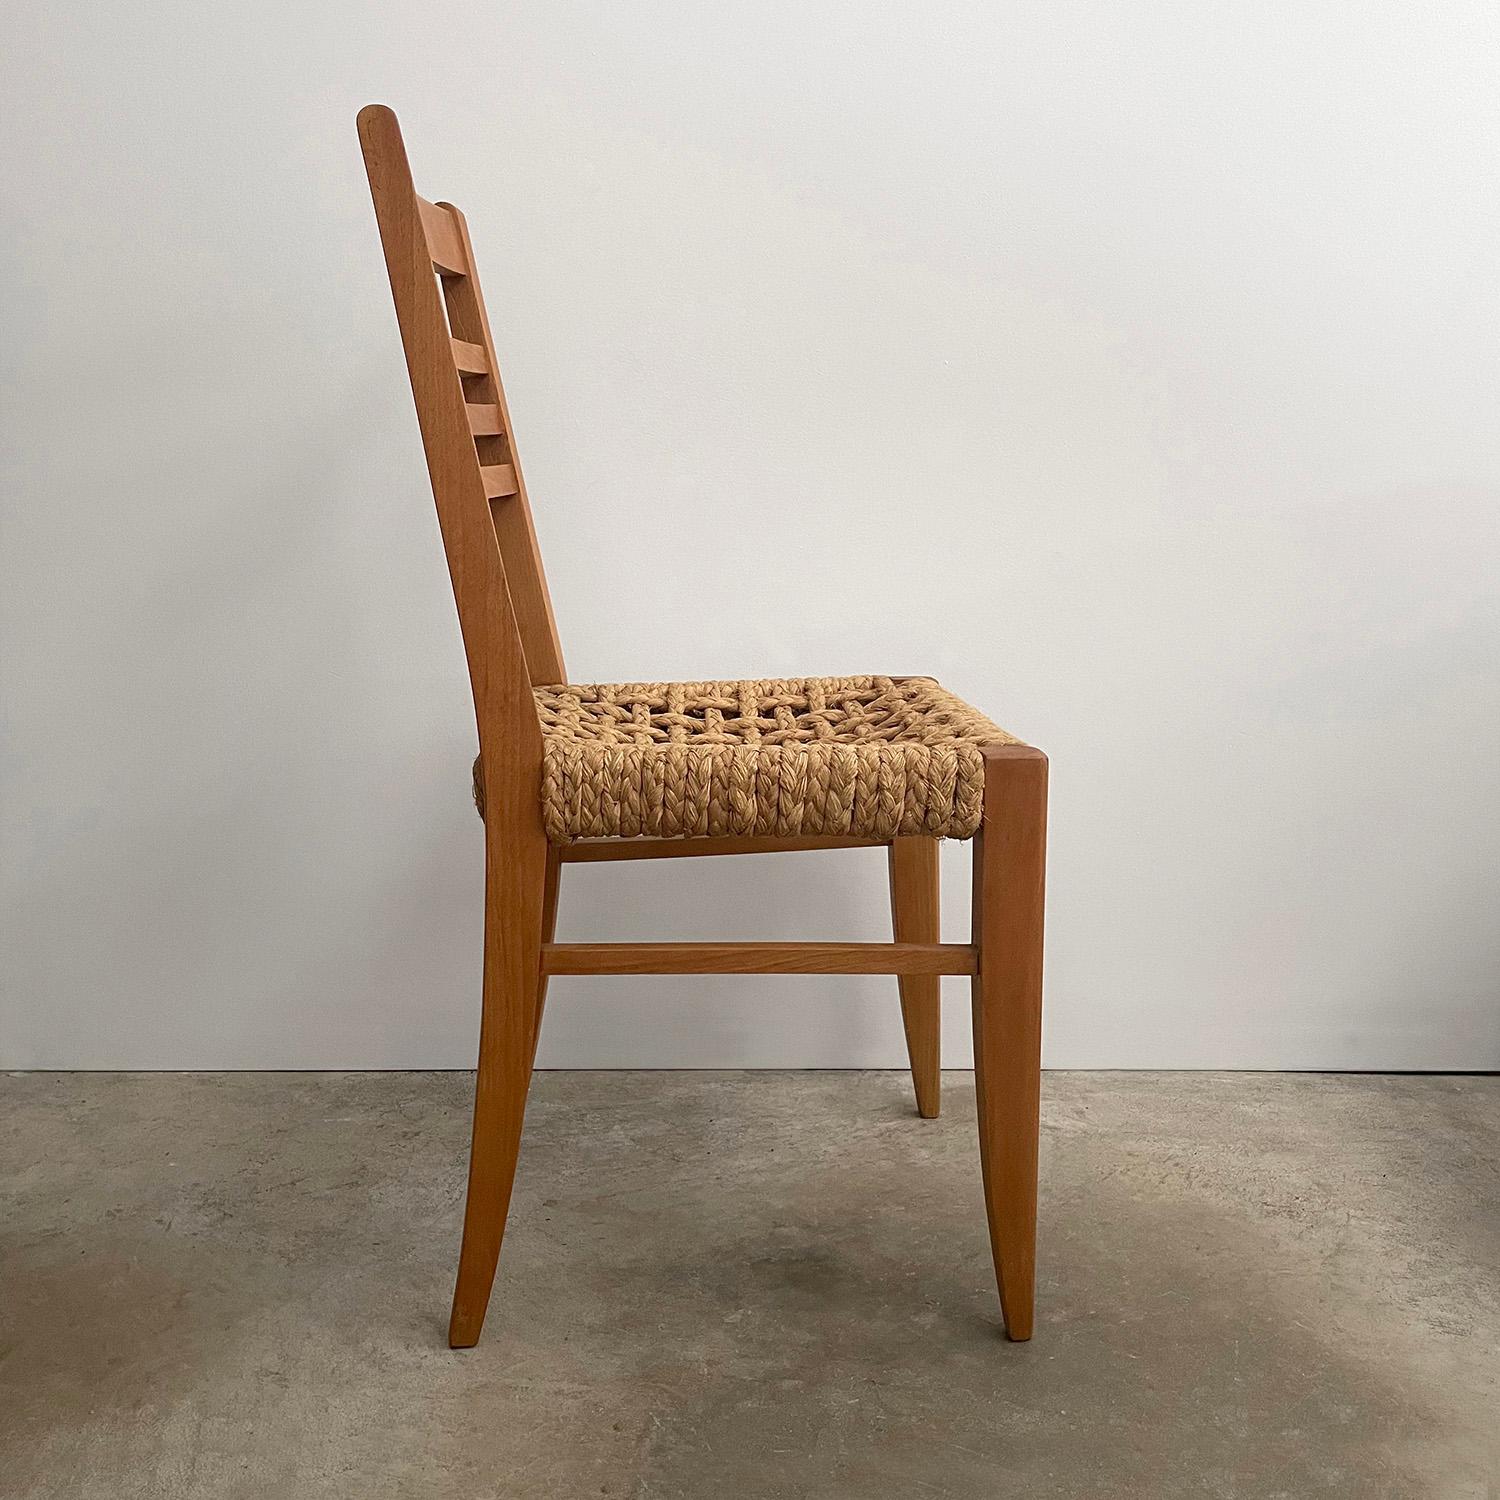  Audoux Minet French Oak & Rope Side Chair  In Good Condition For Sale In Los Angeles, CA